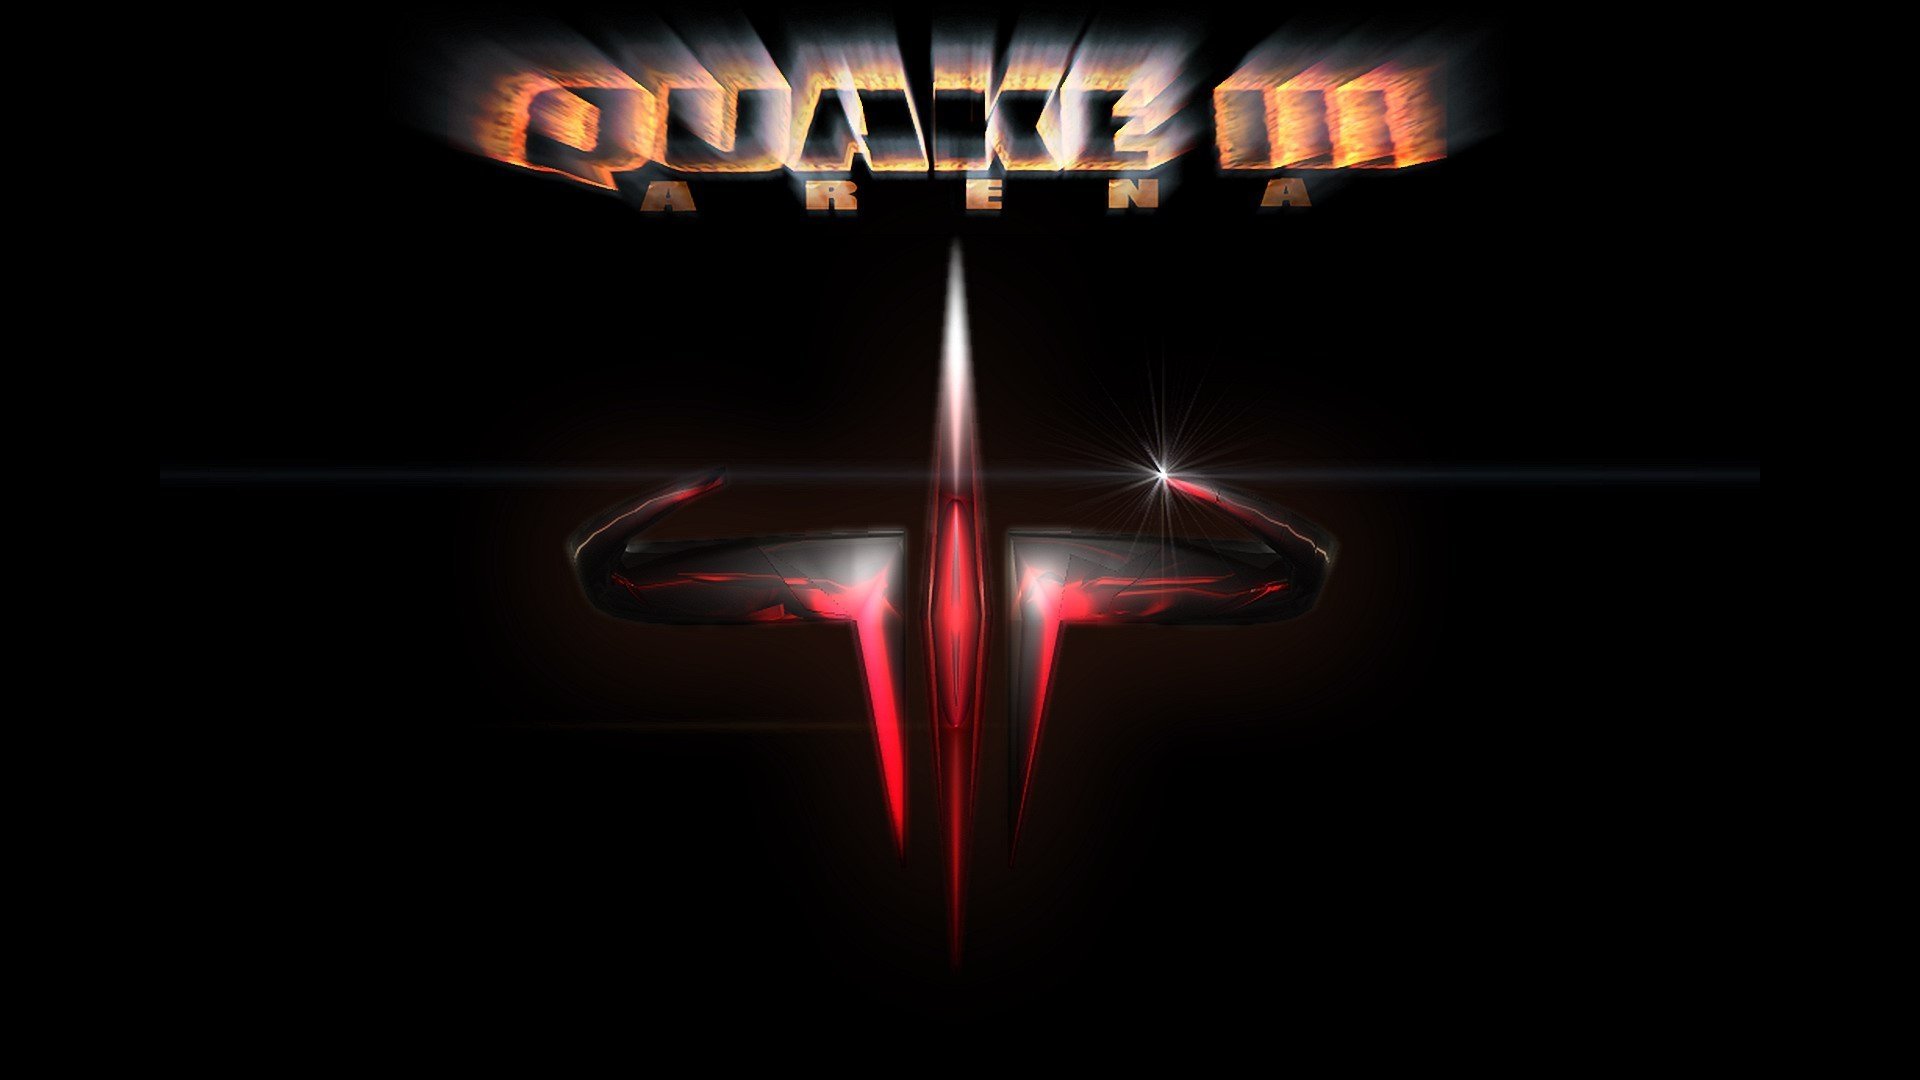 Quake III Arena HD Wallpaper and Background Image